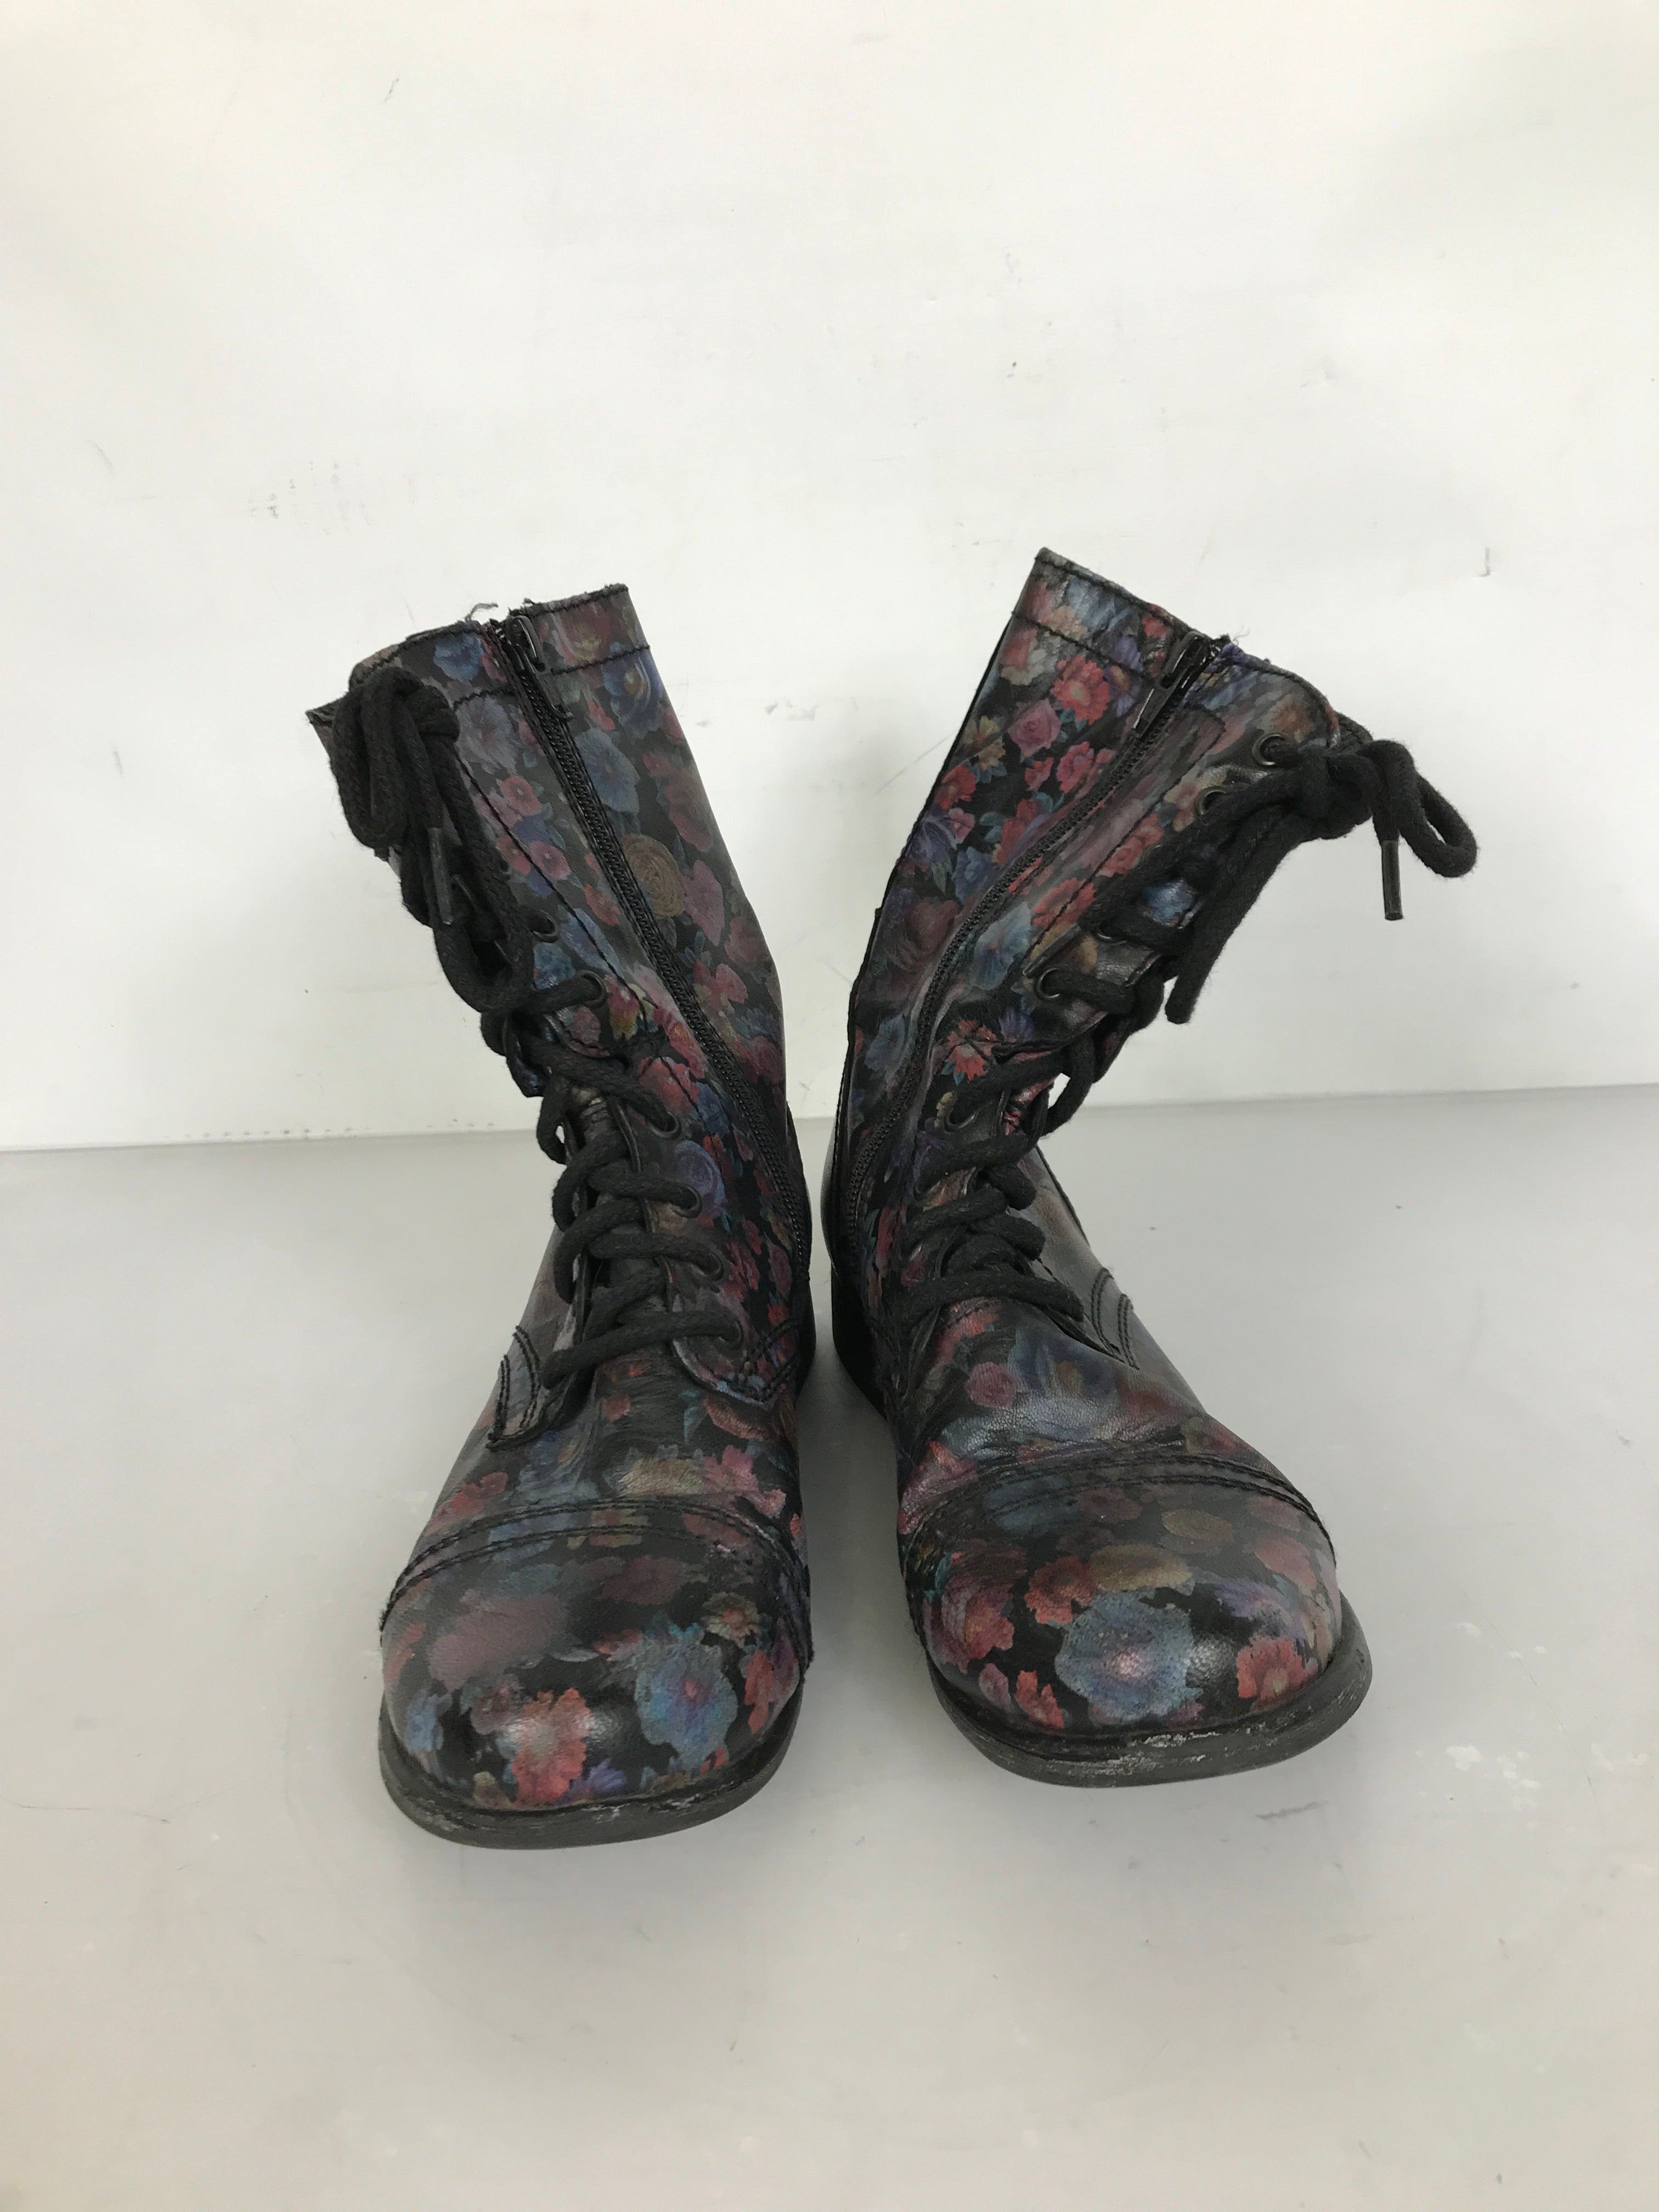 Steve Madden Floral Print Troopa Combat Boots Women's Size 8